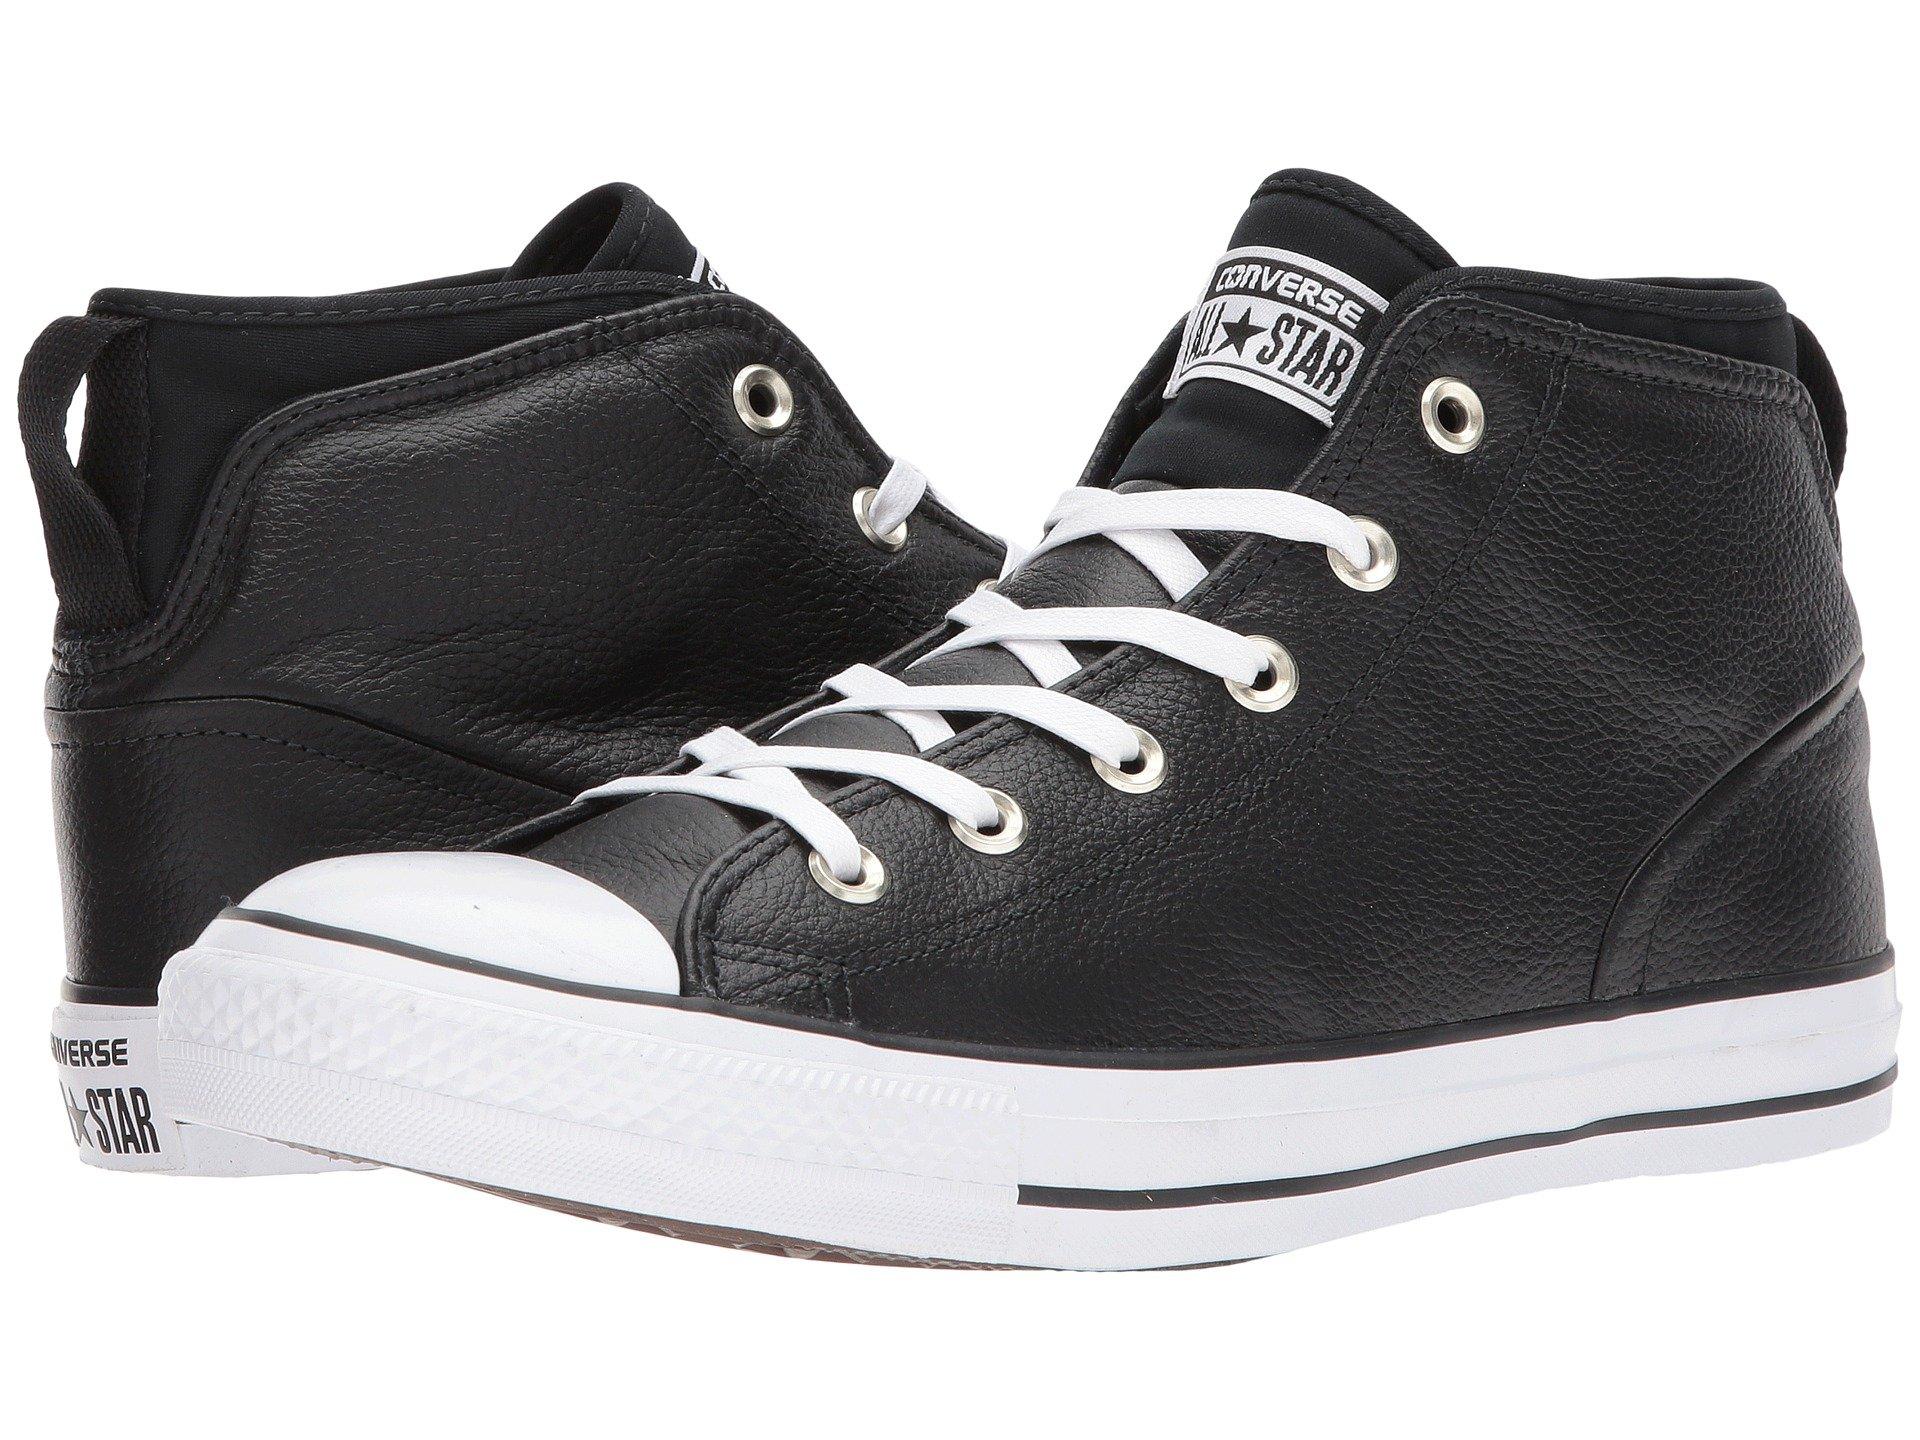 converse chuck taylor leather mid